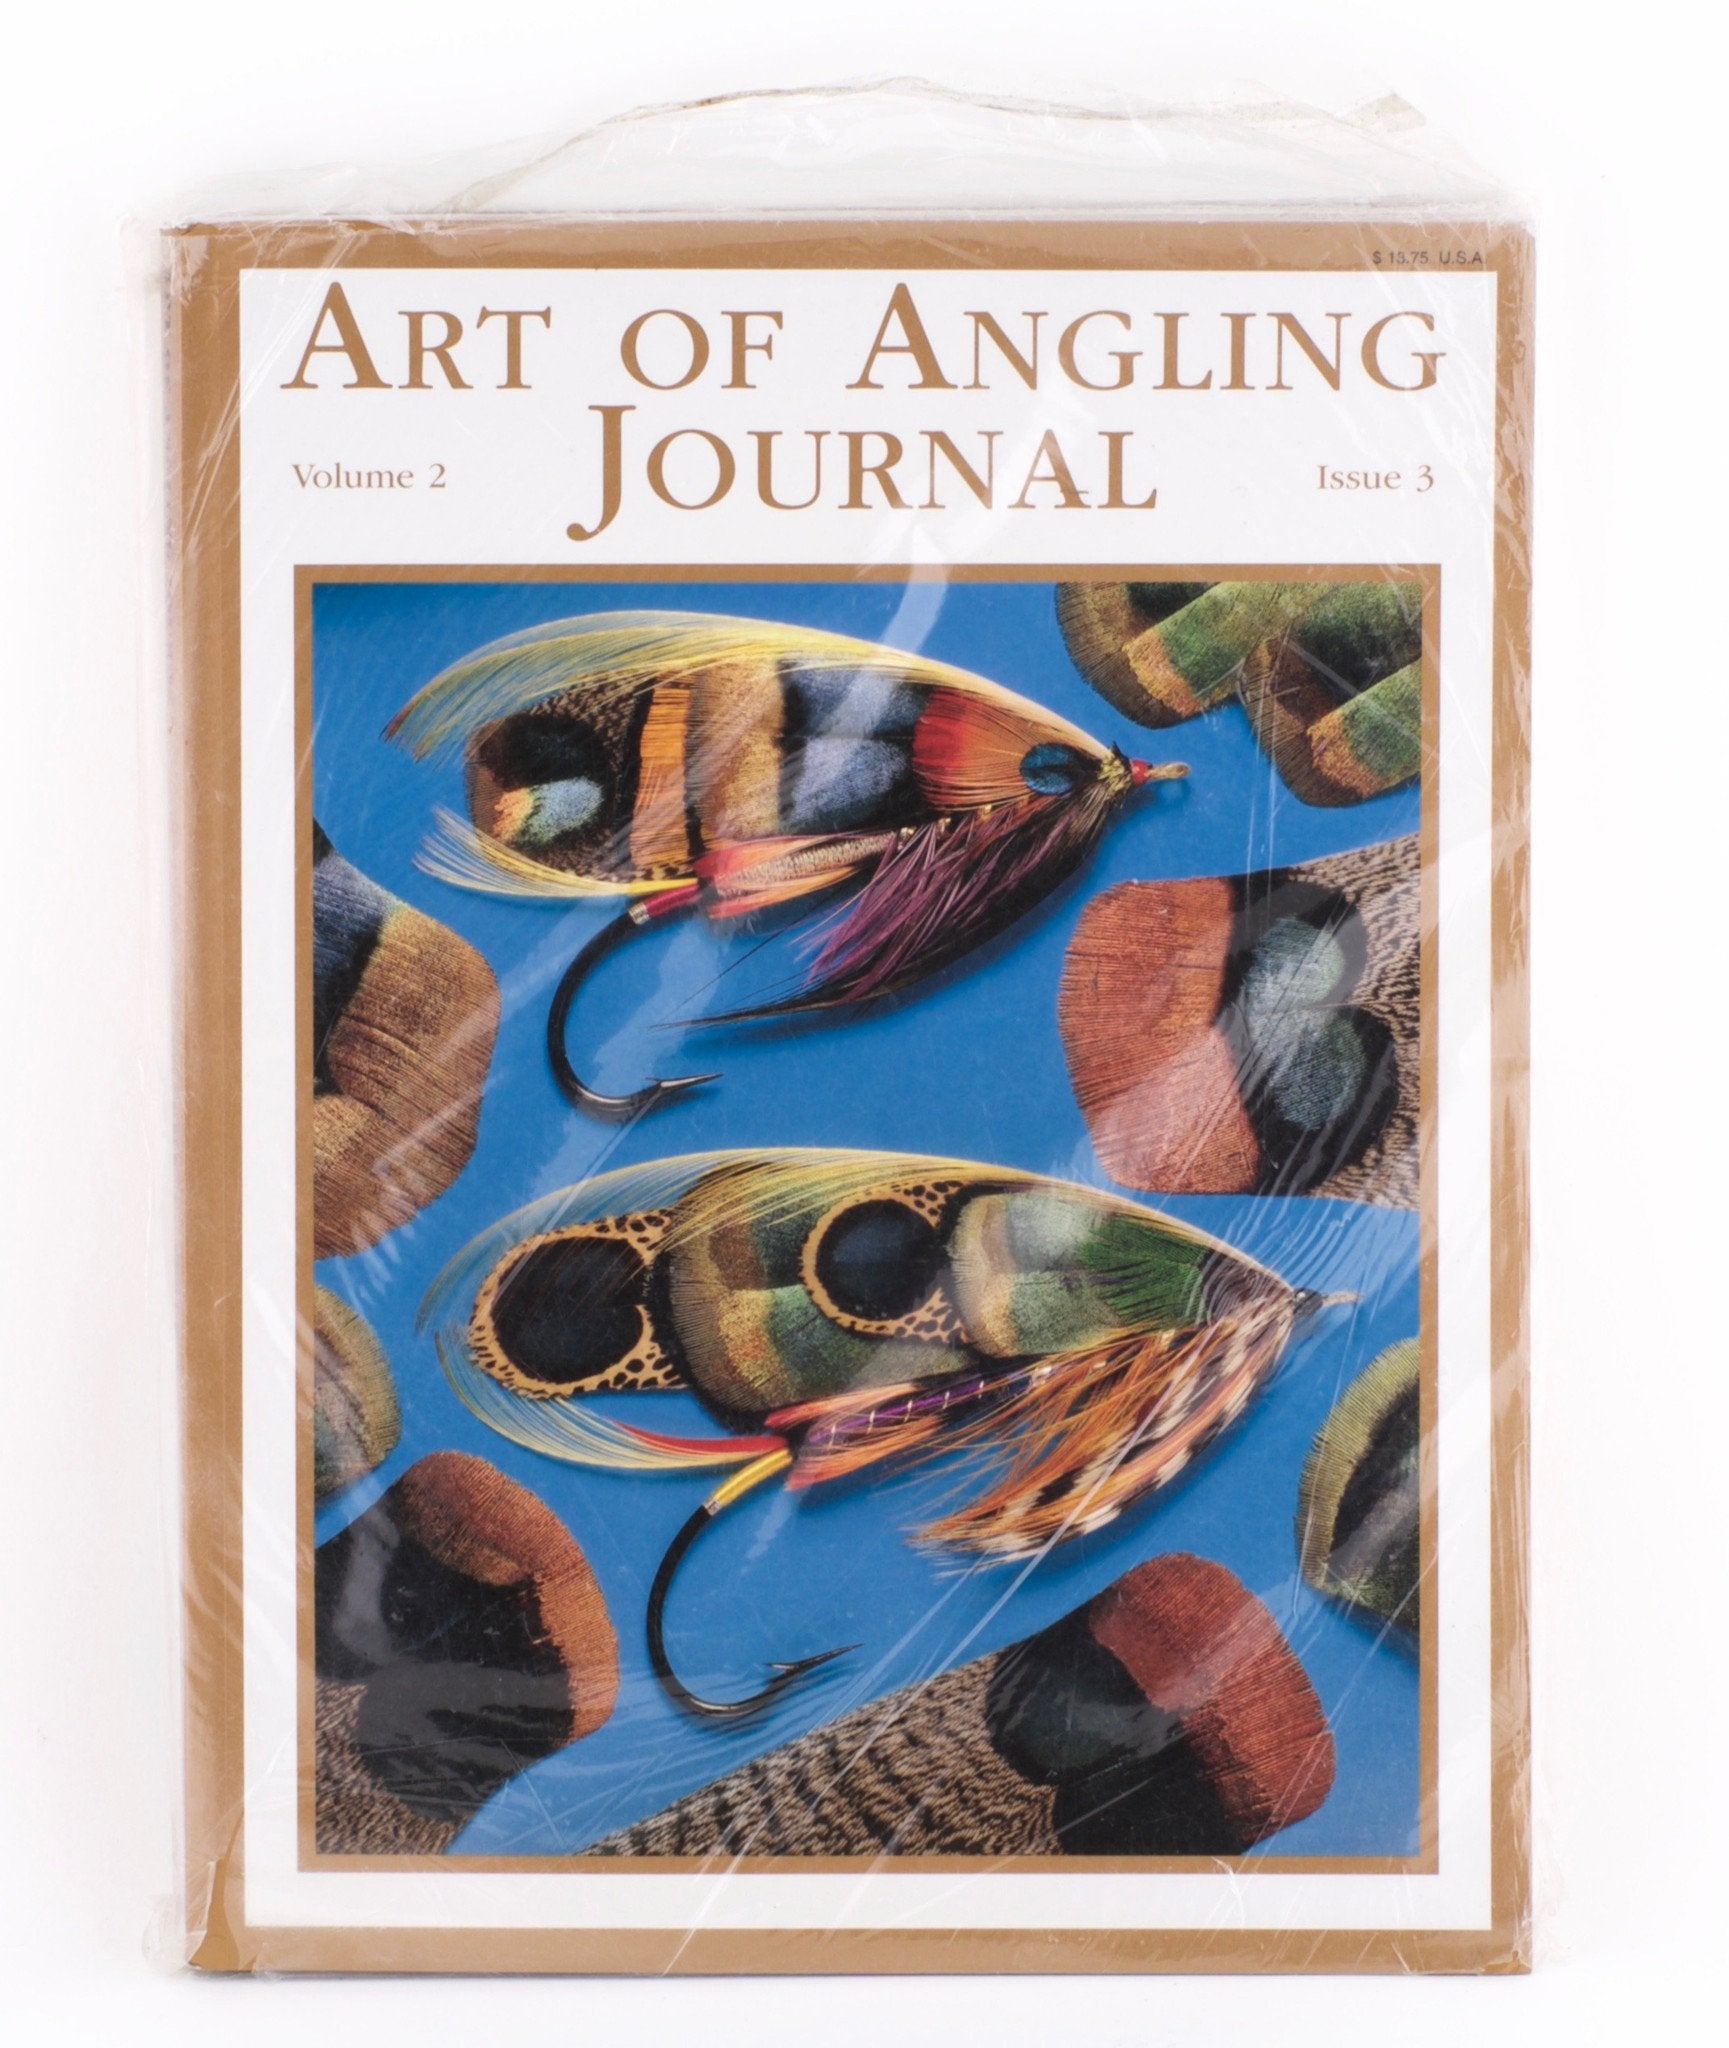 Art of Angling Journal - Volume 2, Issue 3 